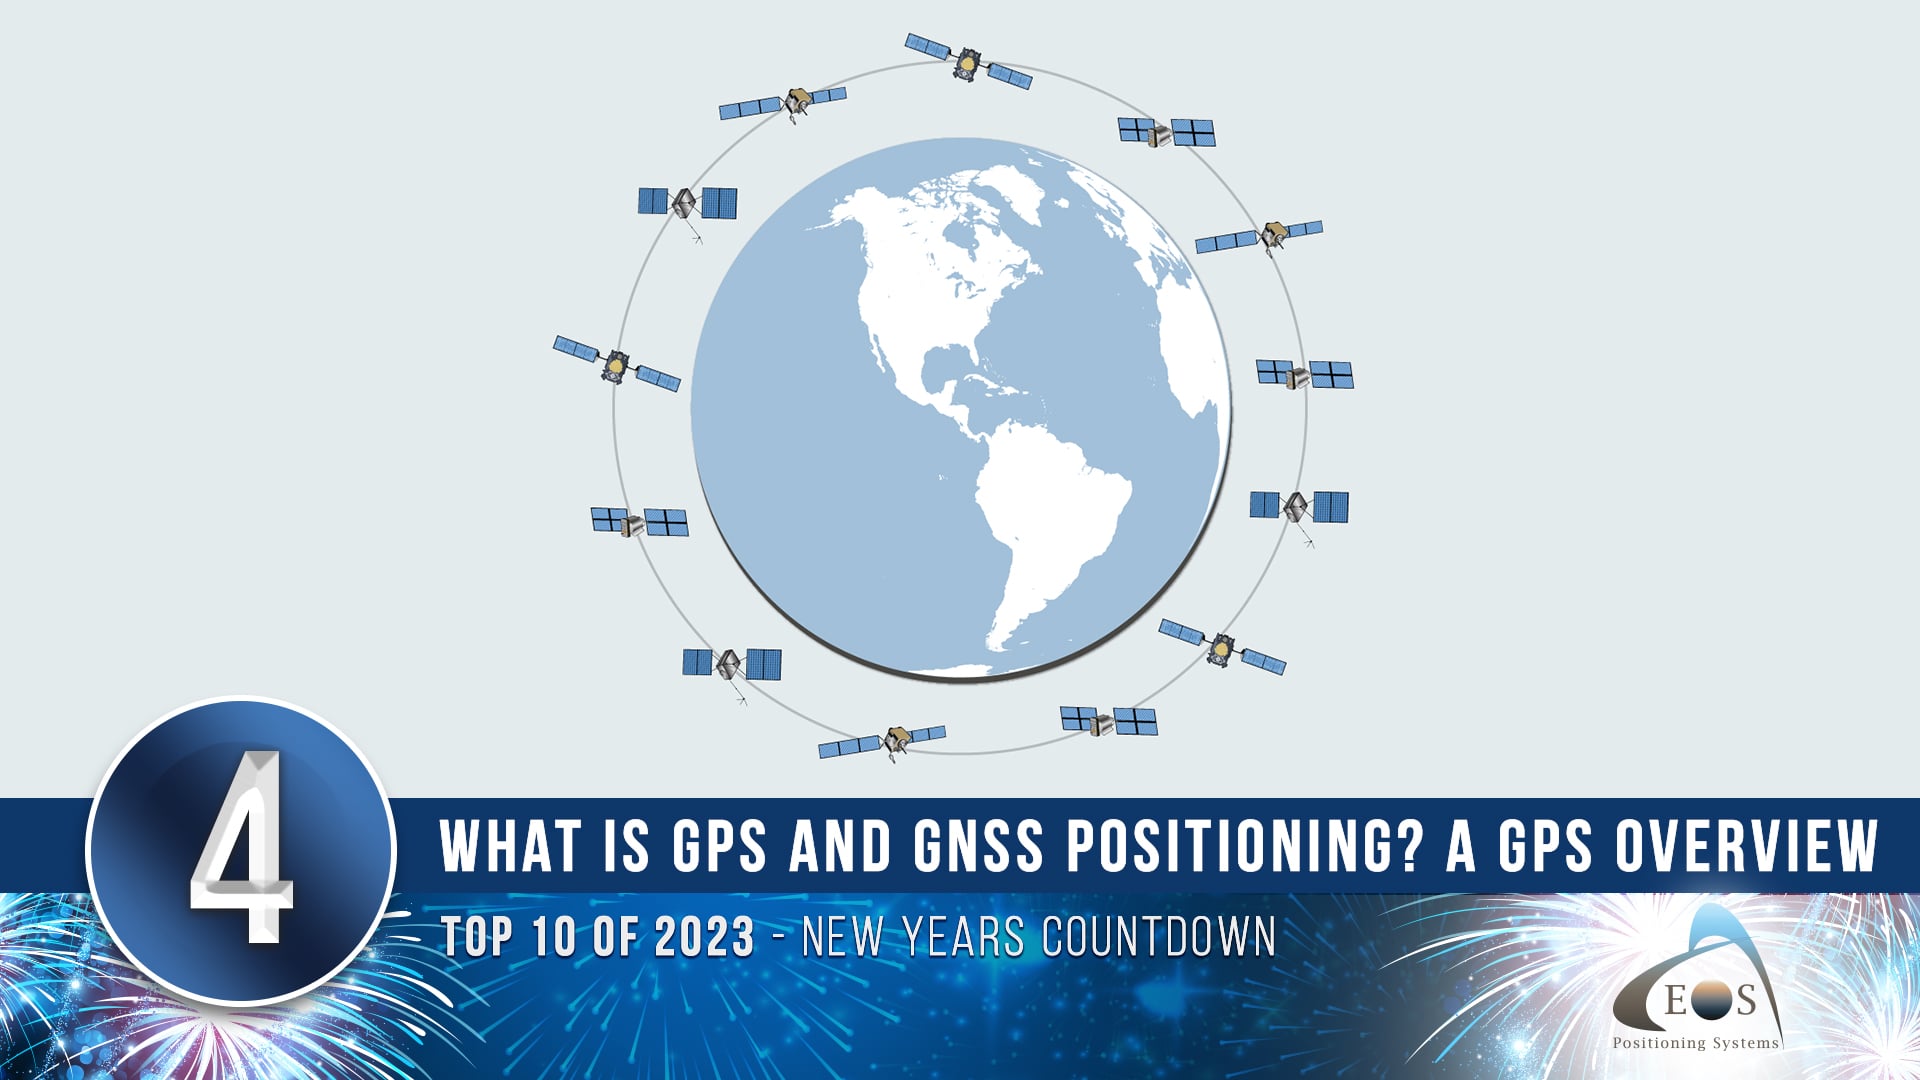 4 - What is GPS and GNSS Positioning? A GPS Overview Top 10 of 2023